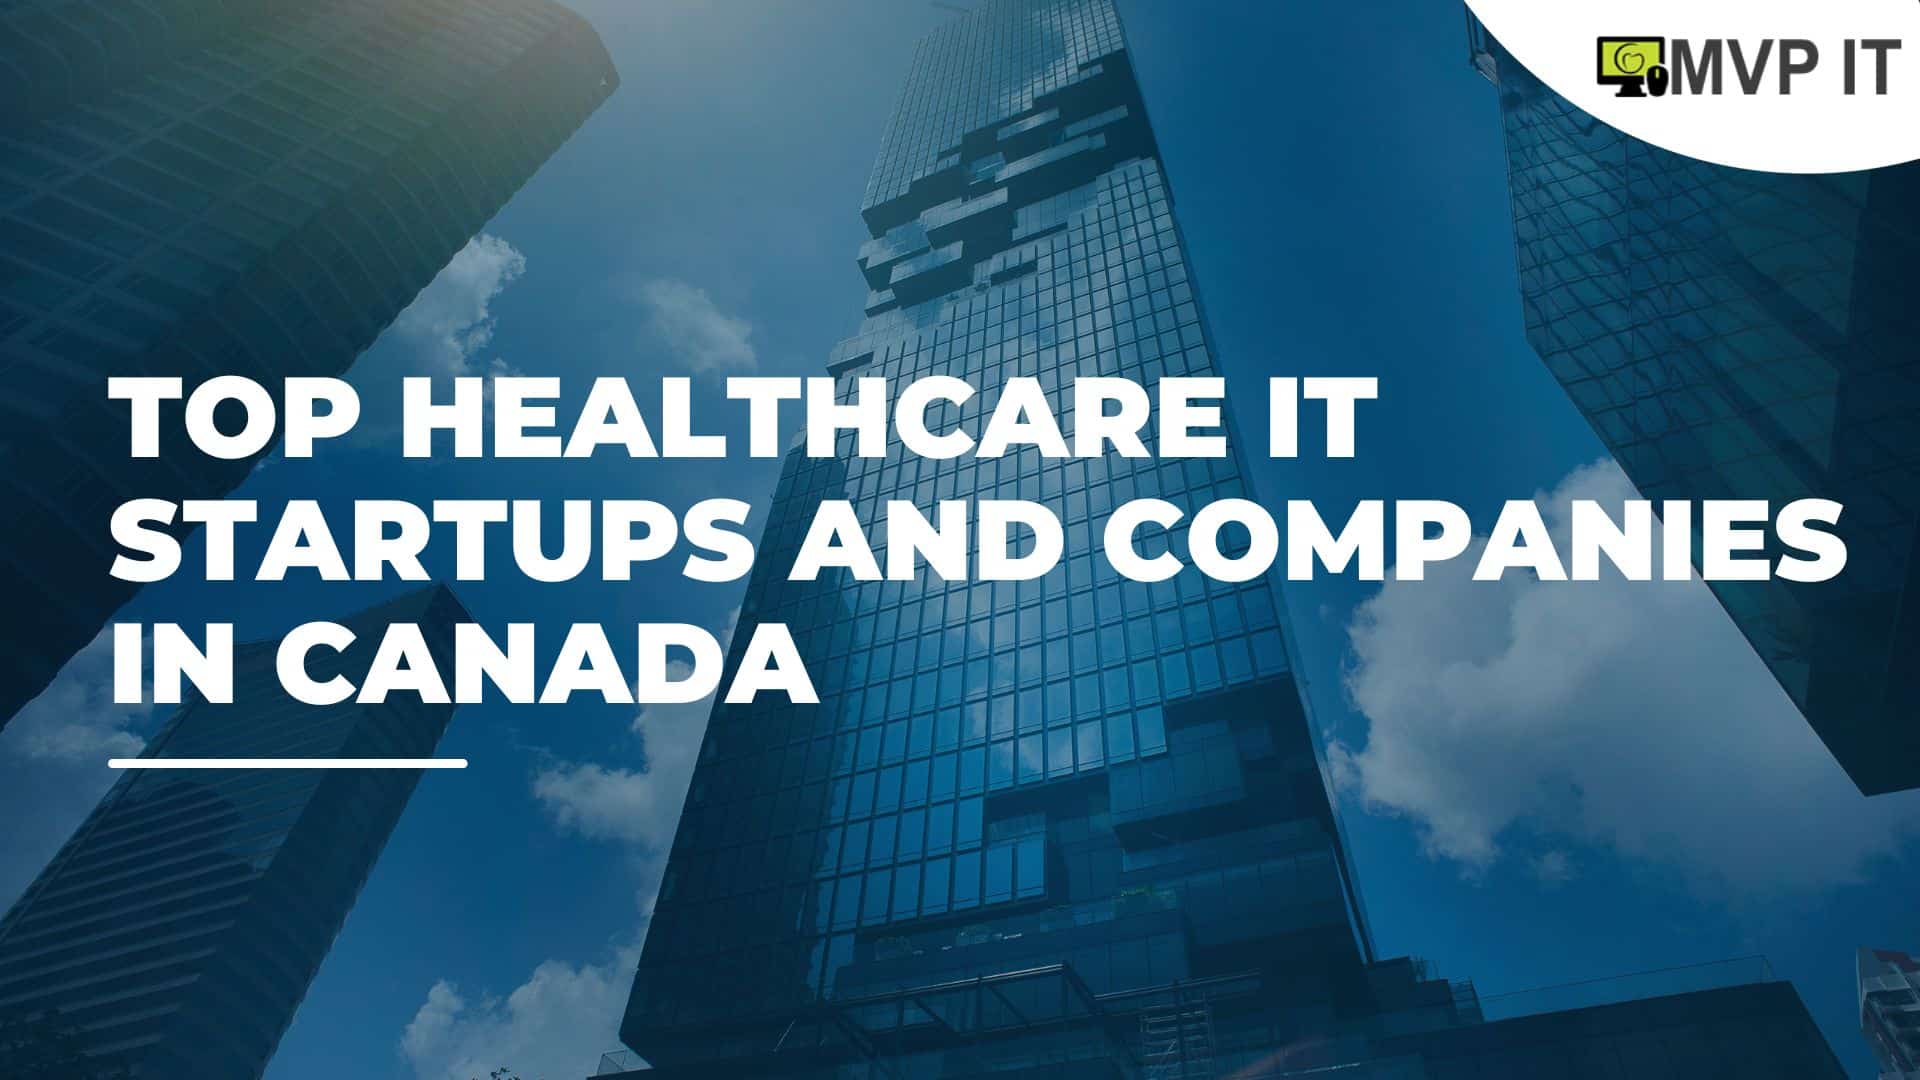 Top Healthcare IT Startups and Companies in Canada